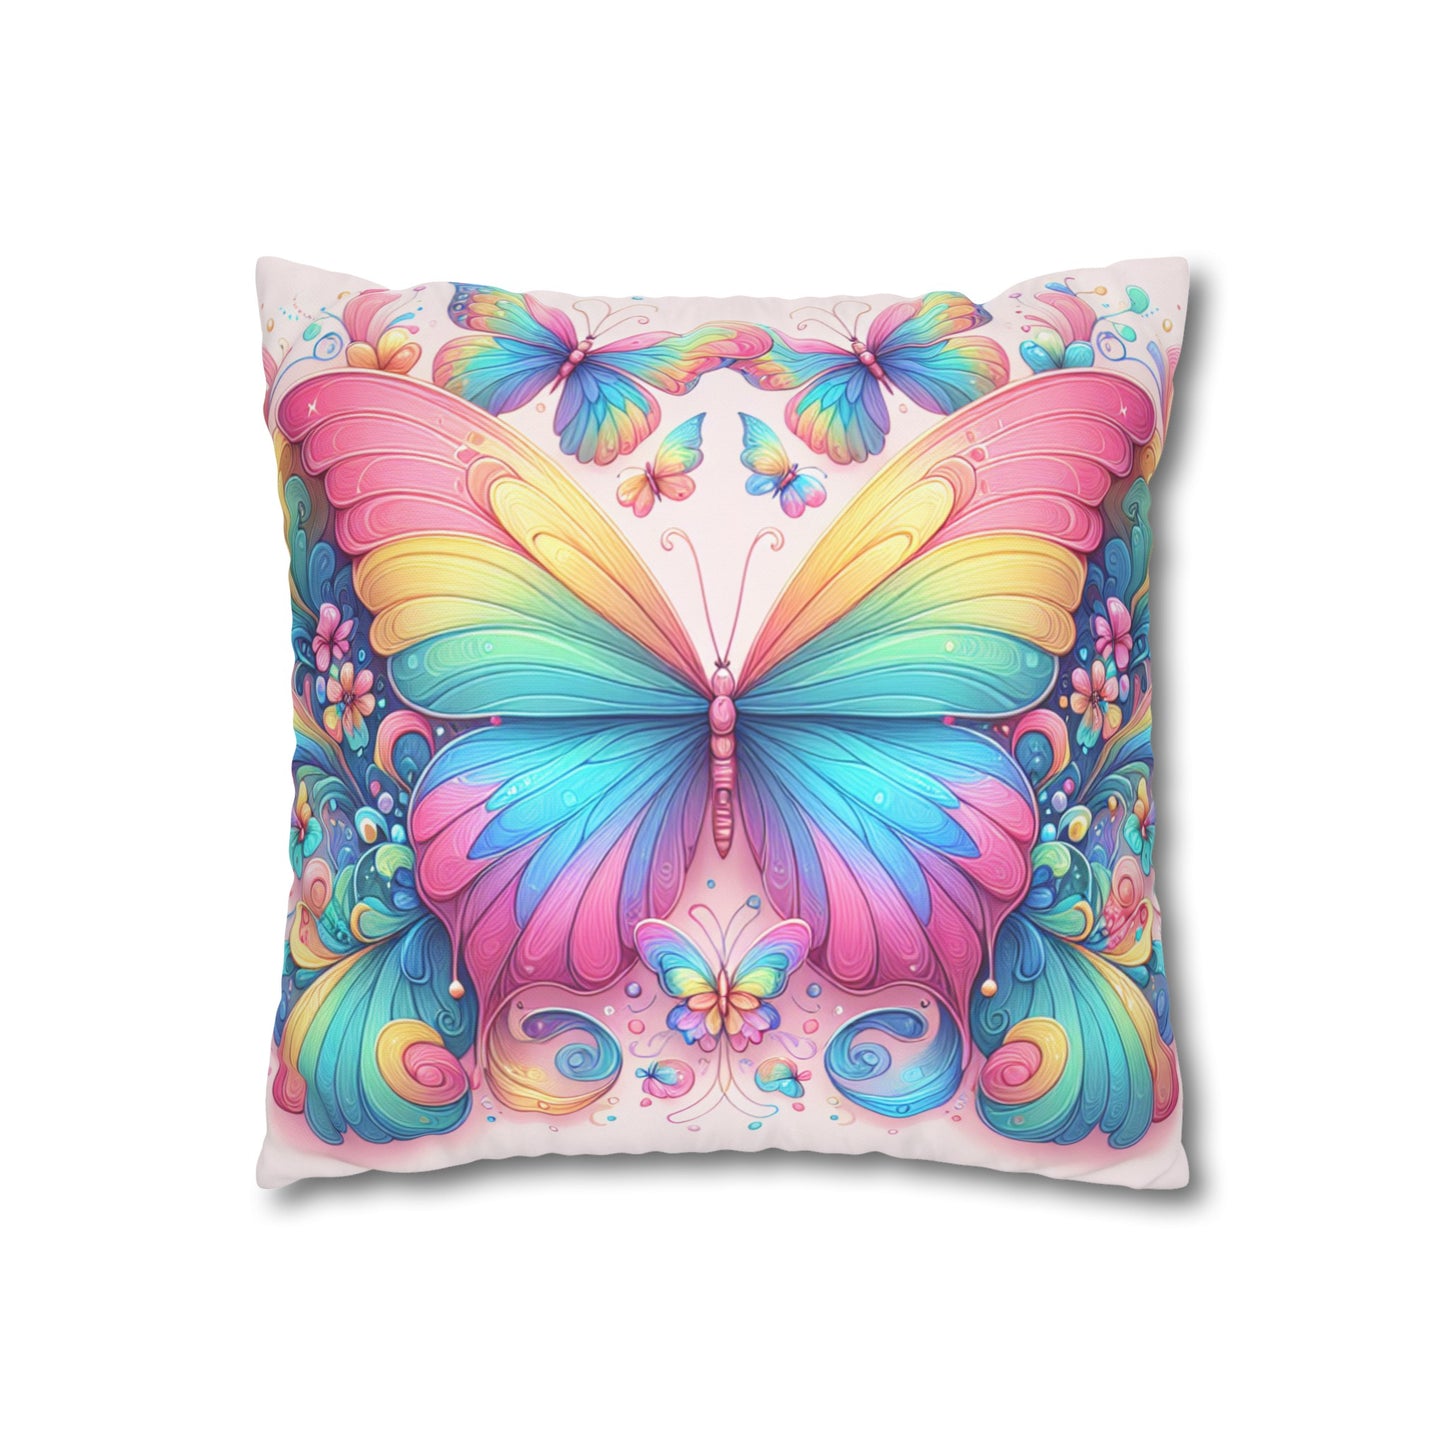 Psychedelic Rainbow Butterfly Cushion Cover